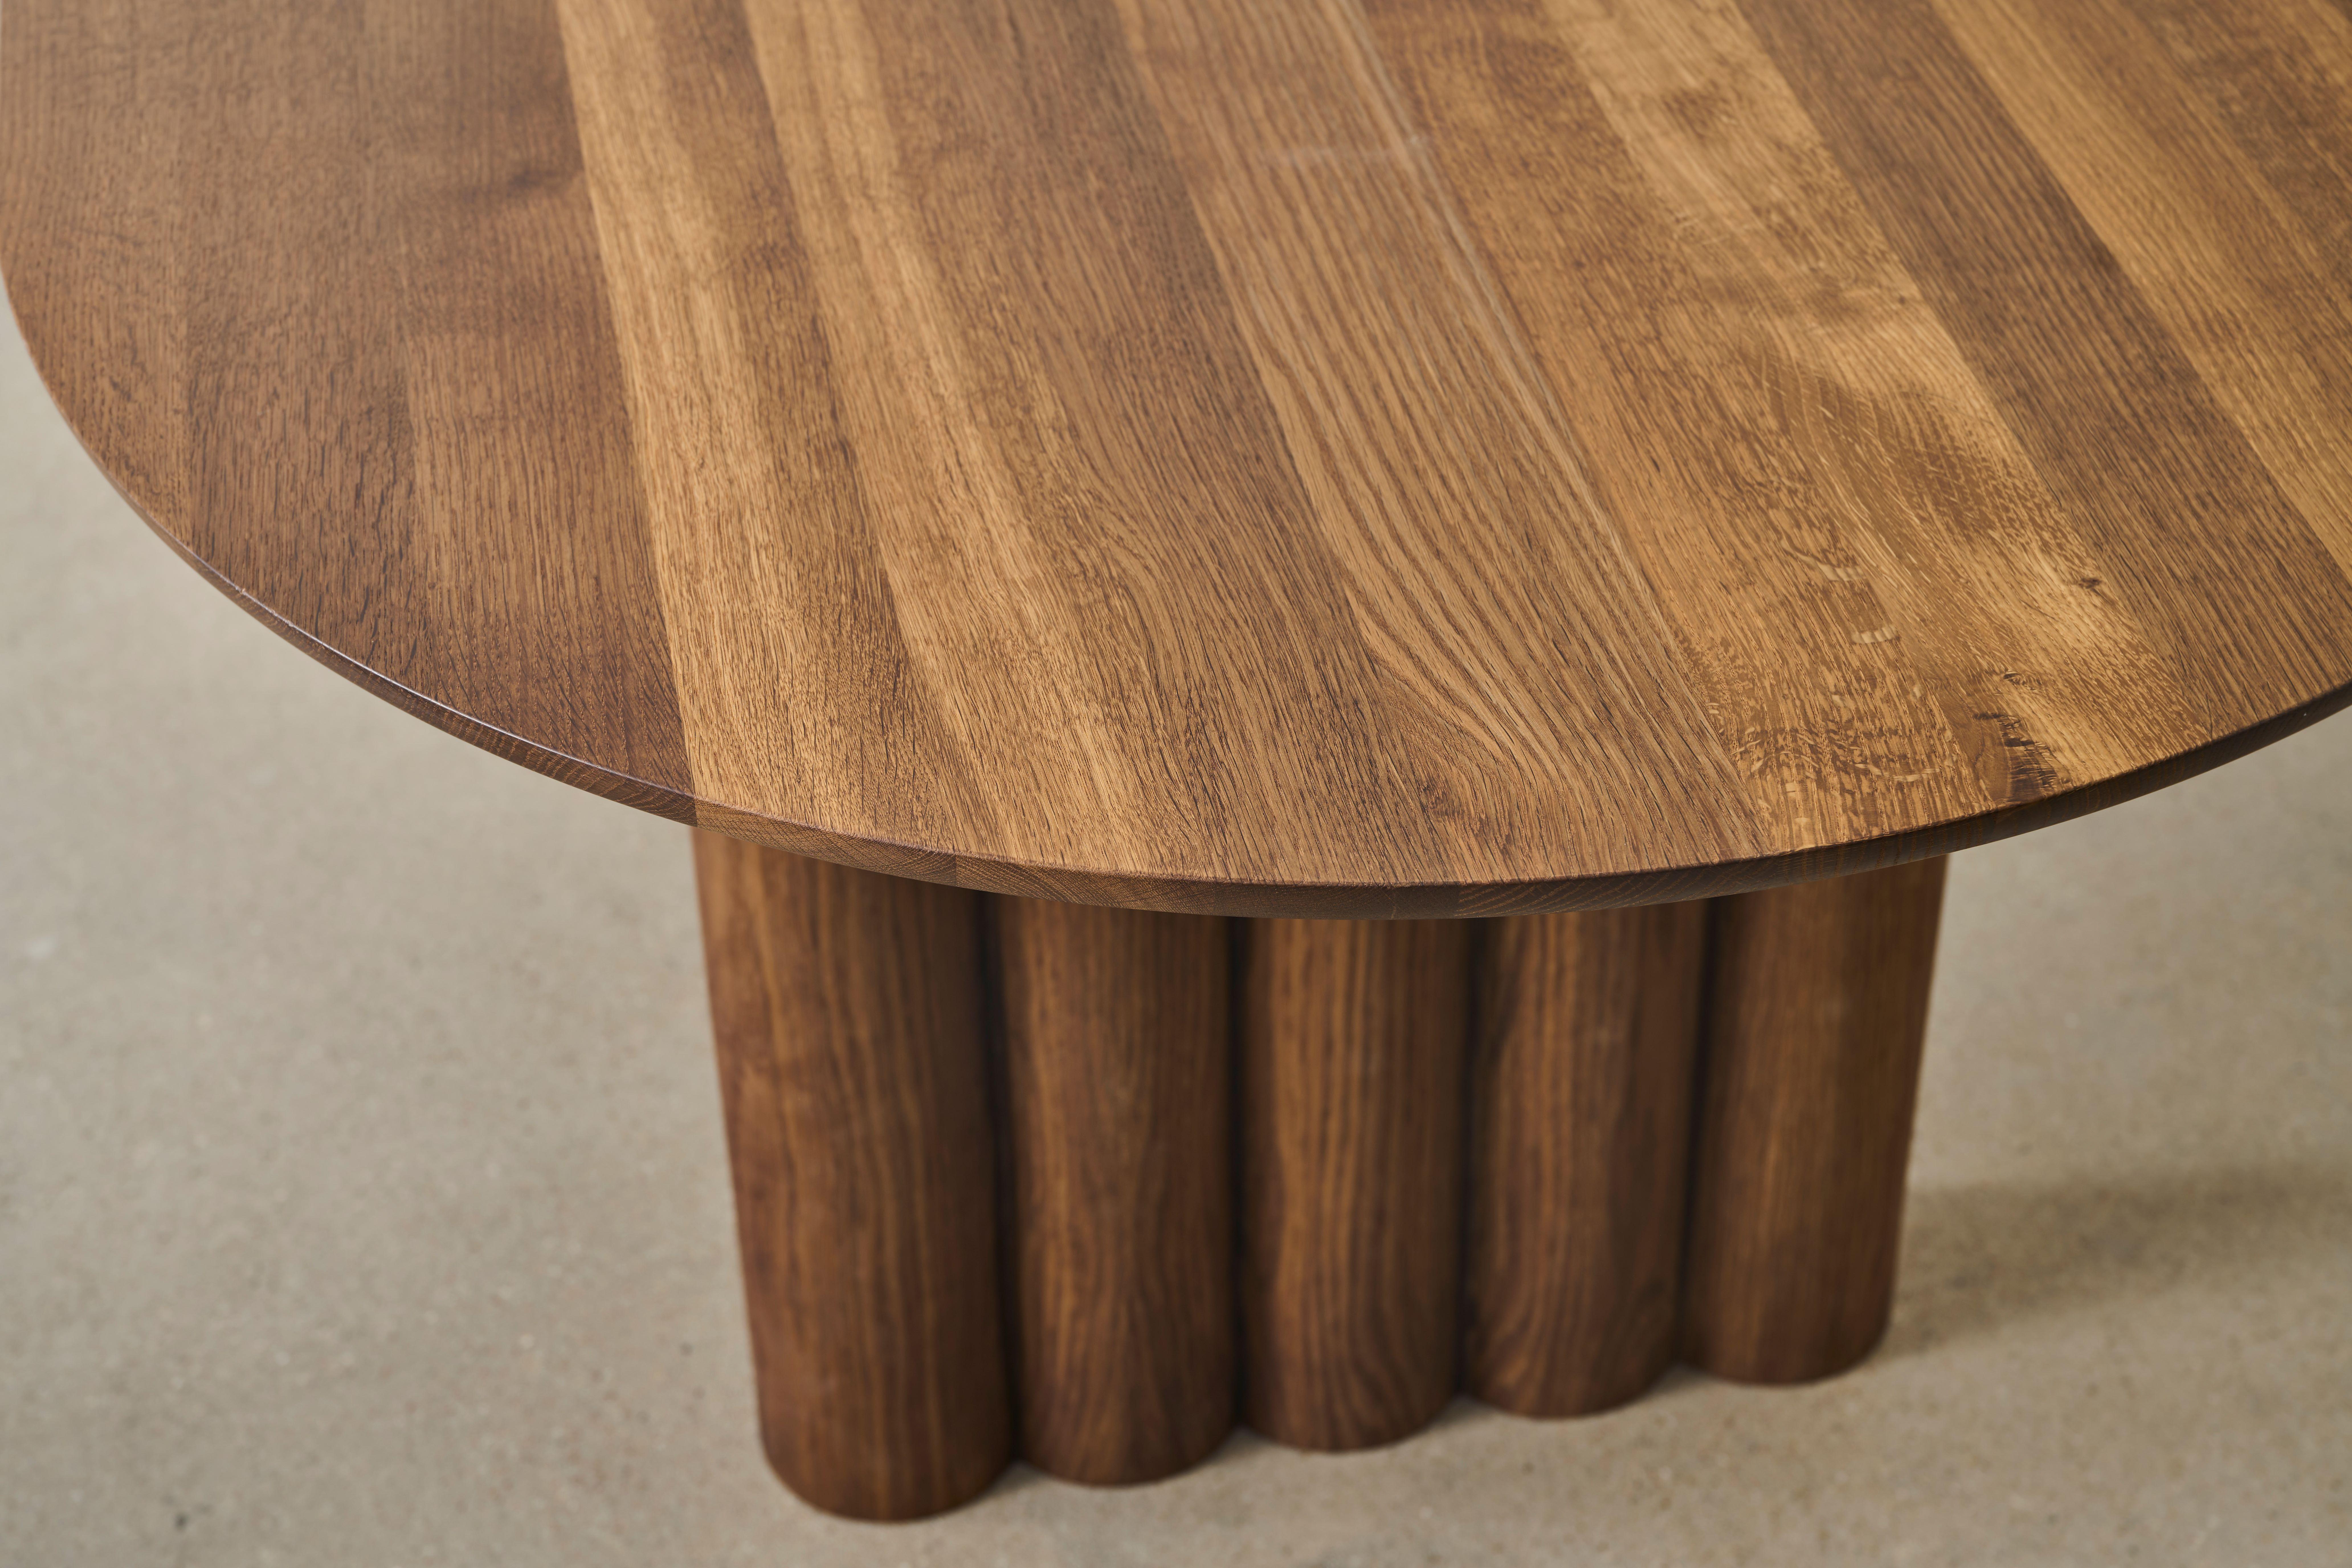 Contemporary Dining Table 'Plush' by Dk3, Smoked Oak or Walnut, 240, Rectangular In New Condition For Sale In Paris, FR